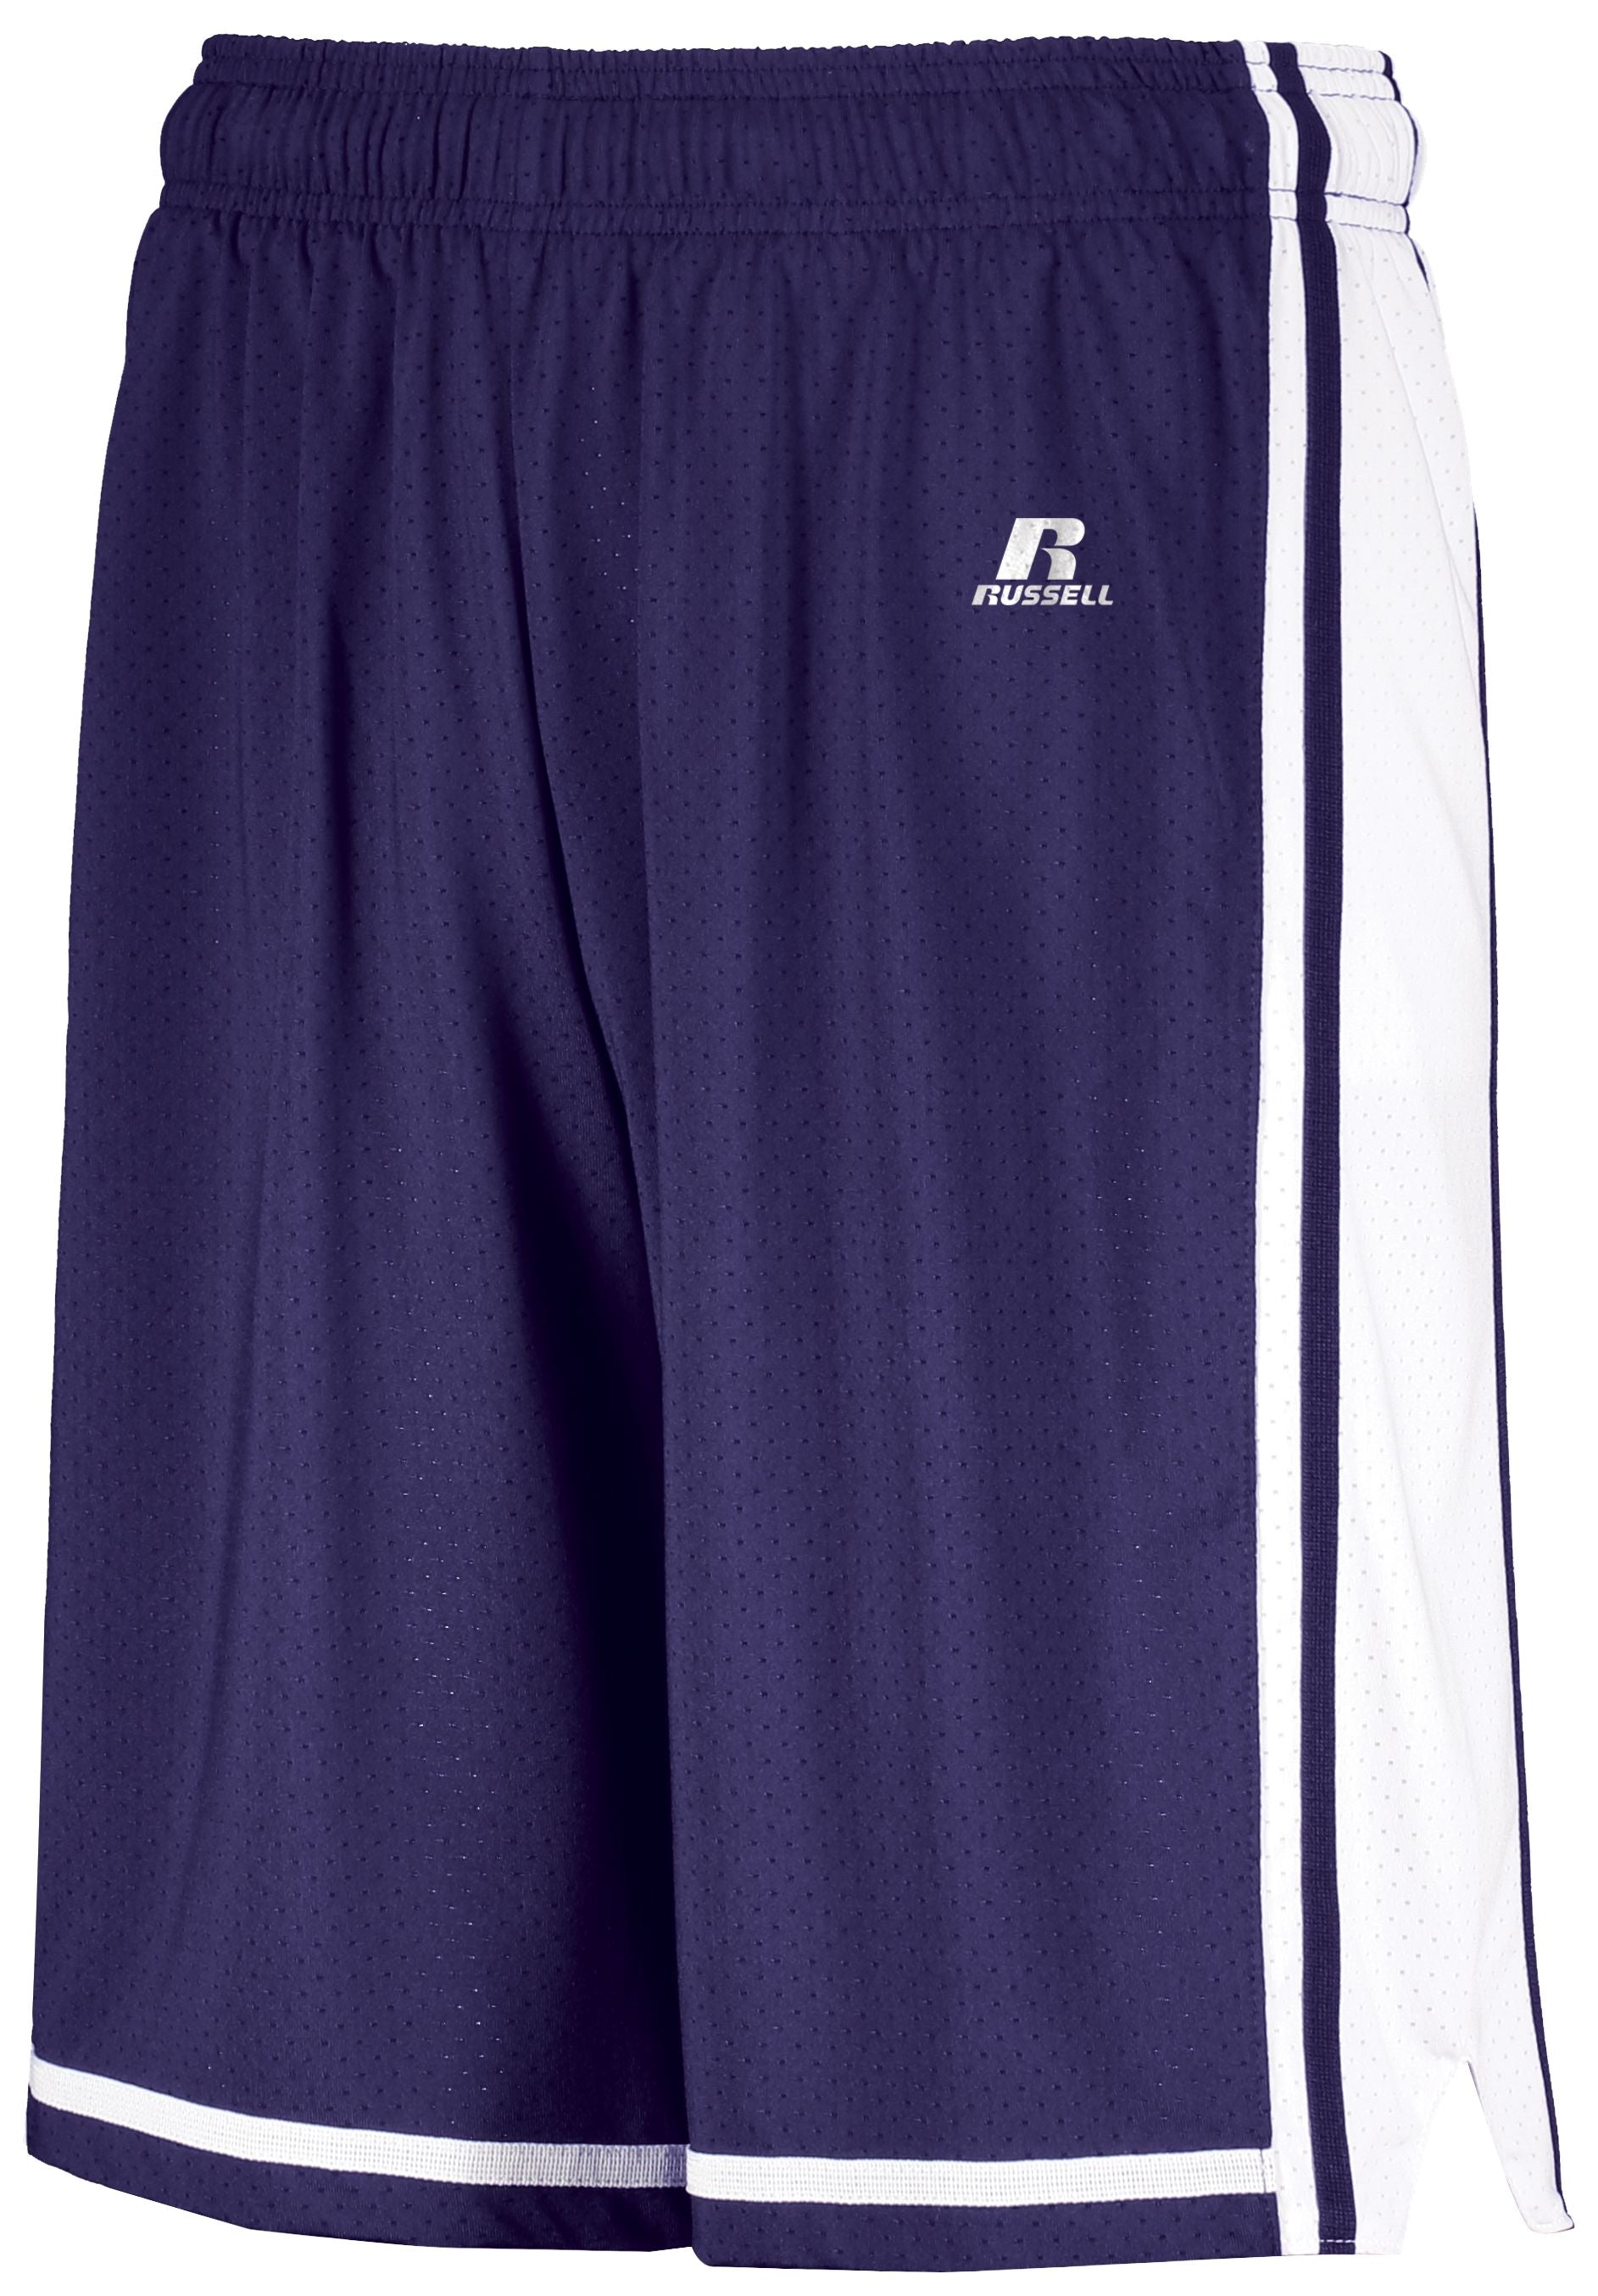 Russell Athletic Youth Legacy Basketball Shorts in Purple/White  -Part of the Youth, Youth-Shorts, Basketball, Russell-Athletic-Products, All-Sports, All-Sports-1 product lines at KanaleyCreations.com